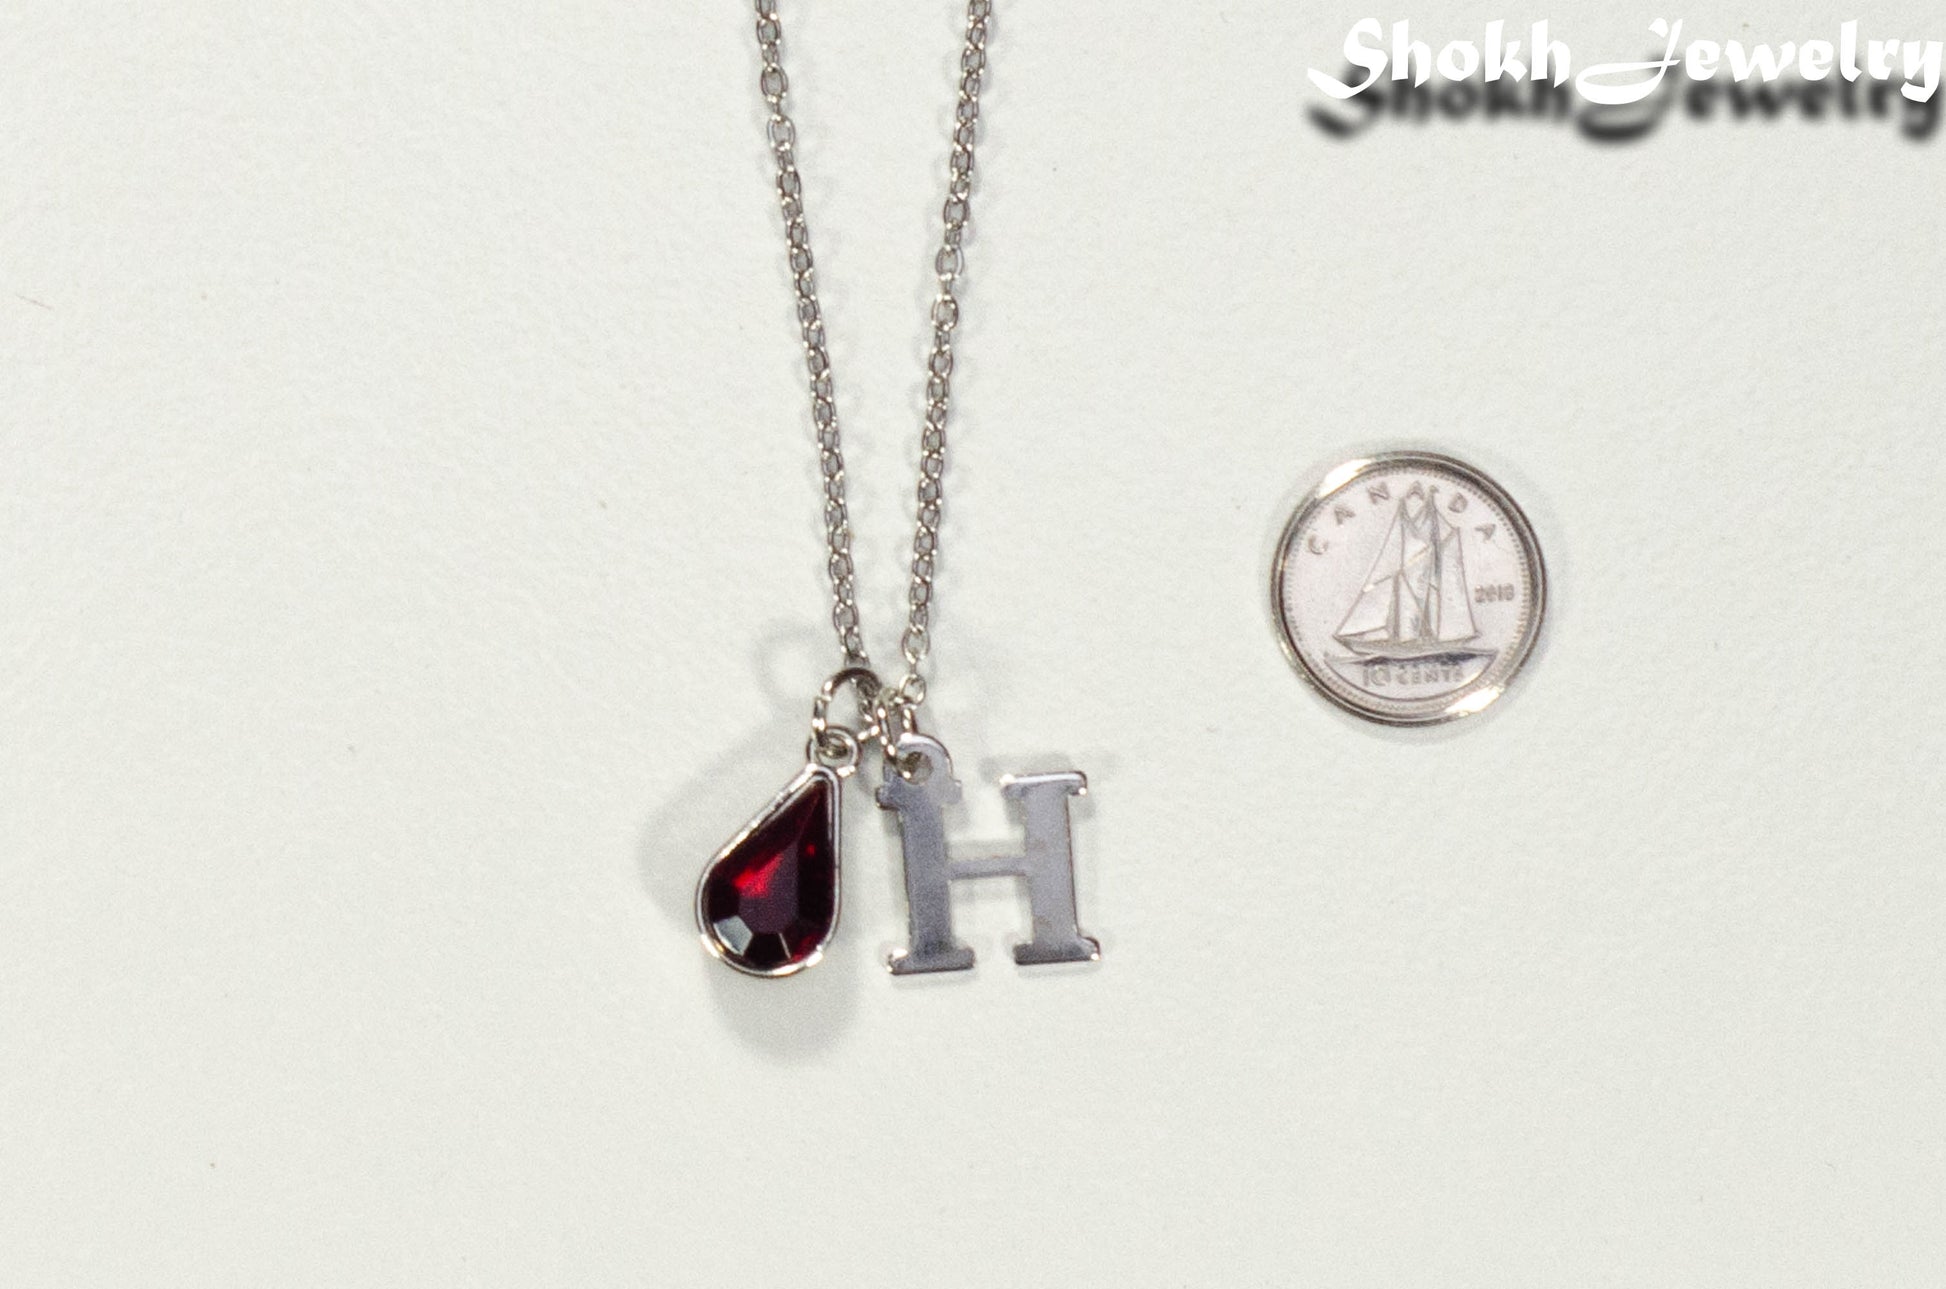 Personalized January Birthstone pendant beside a dime